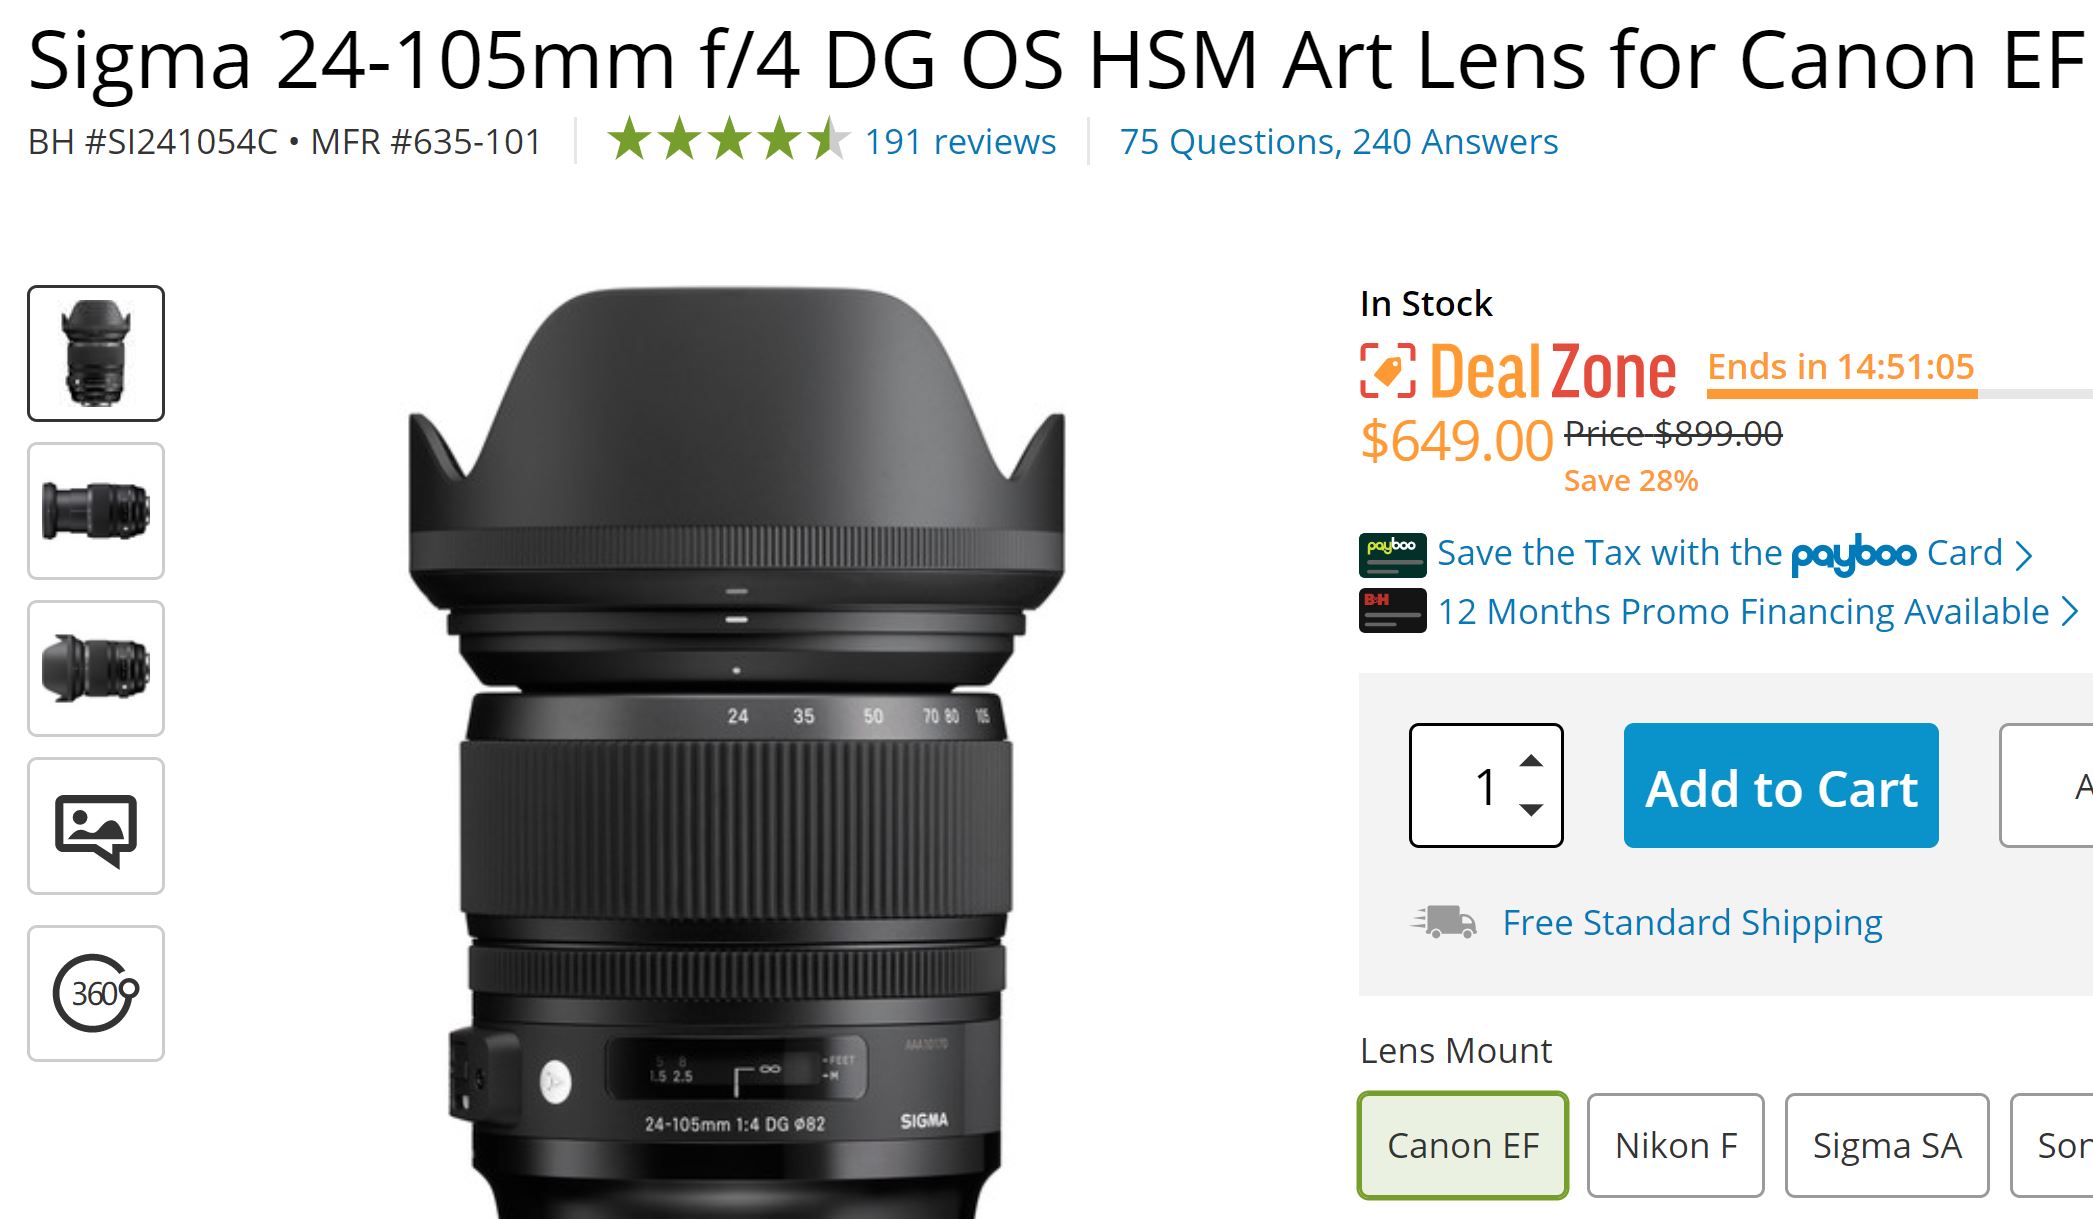 Today Only Deal – Sigma 24-105mm f/4 DG OS HSM Art Lens for $649 